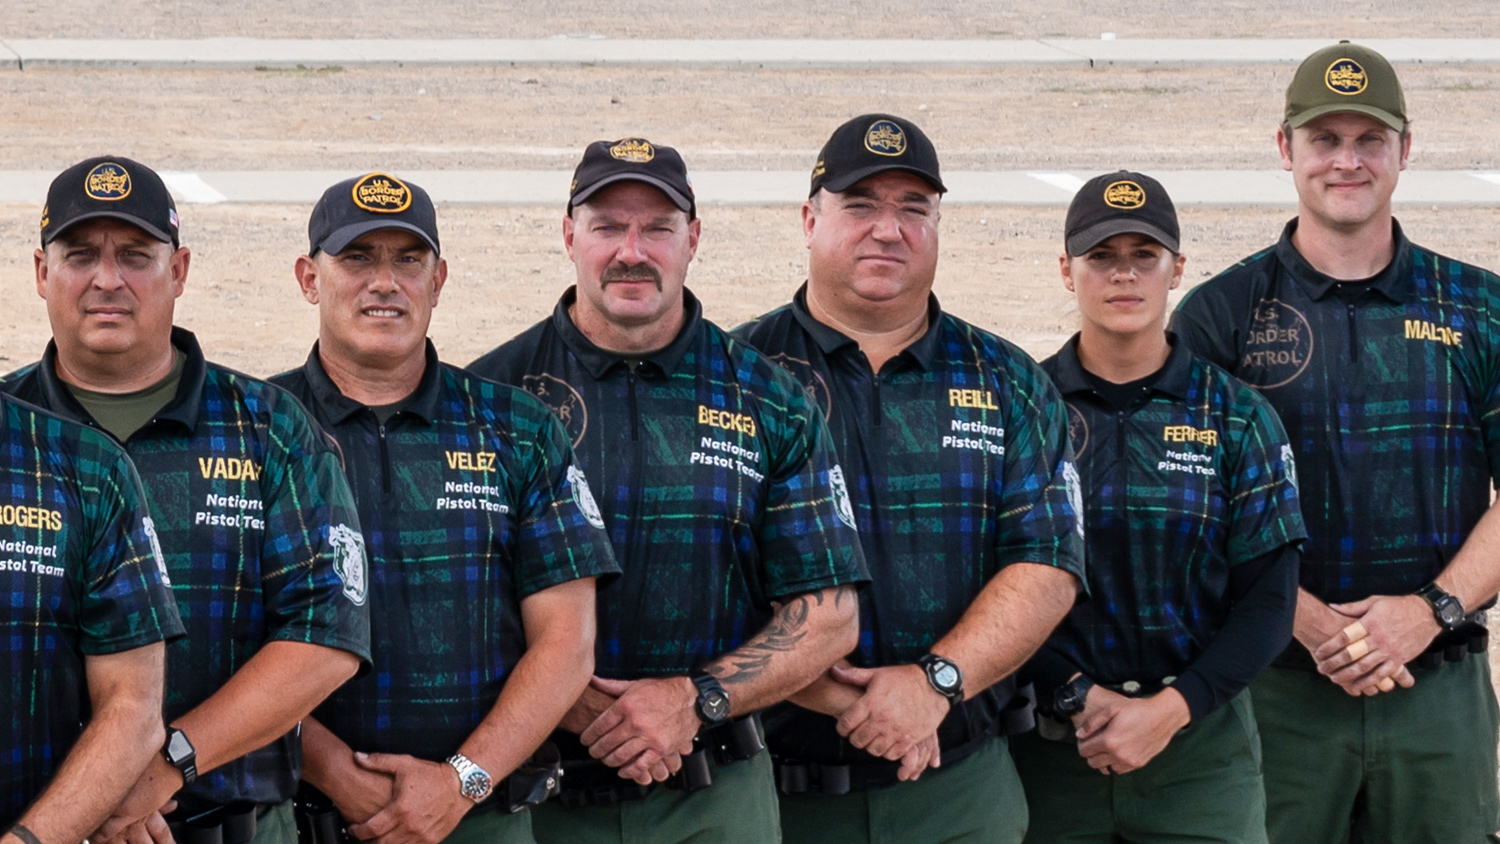 The new team jerseys are based on the U.S. Border Patrol official honor guard tartan.